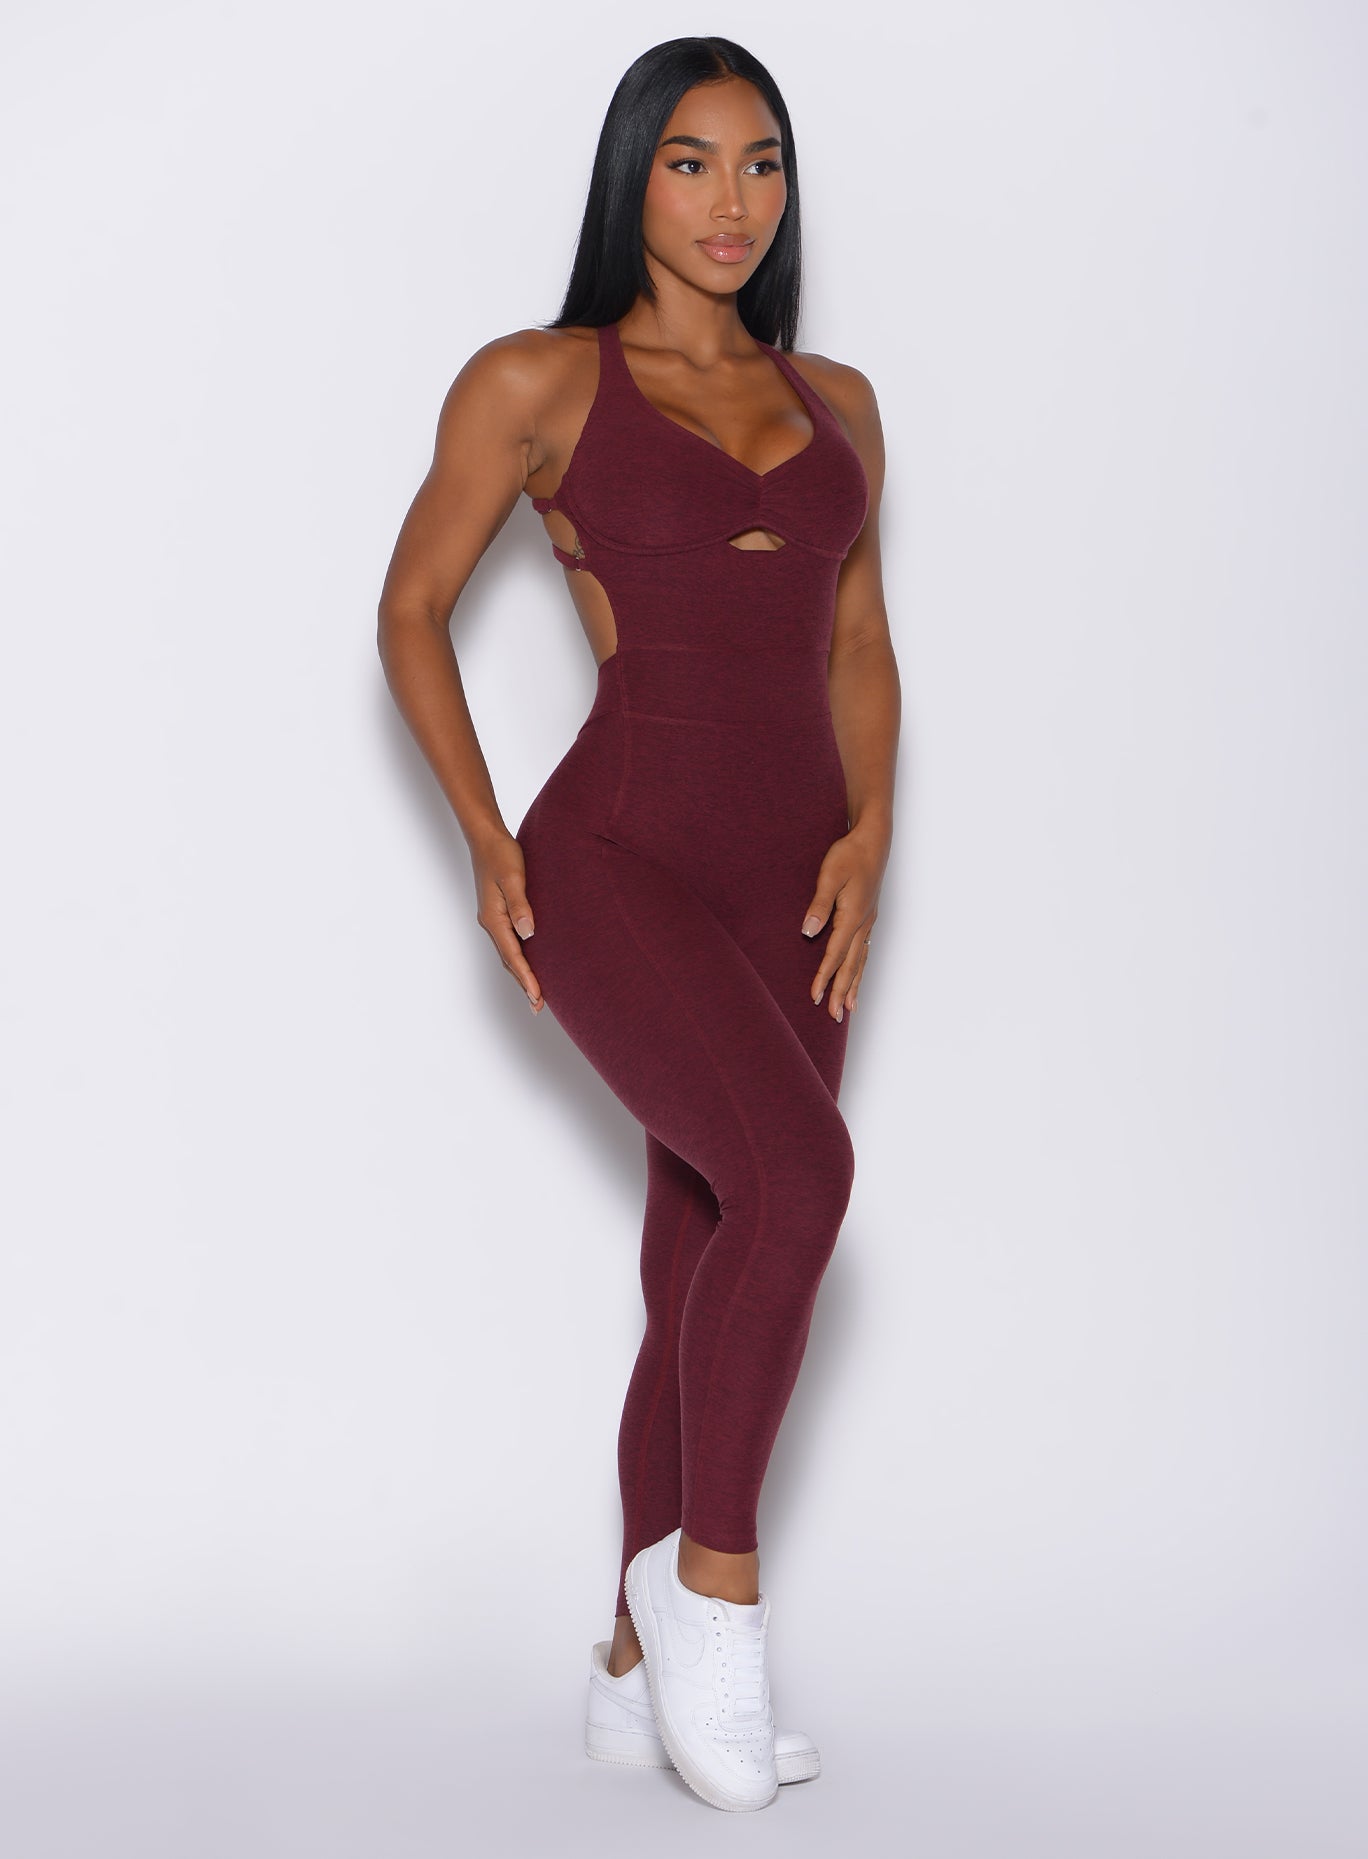 Right side profile view of a model angled right wearing our bombshell bodysuit in red wine color